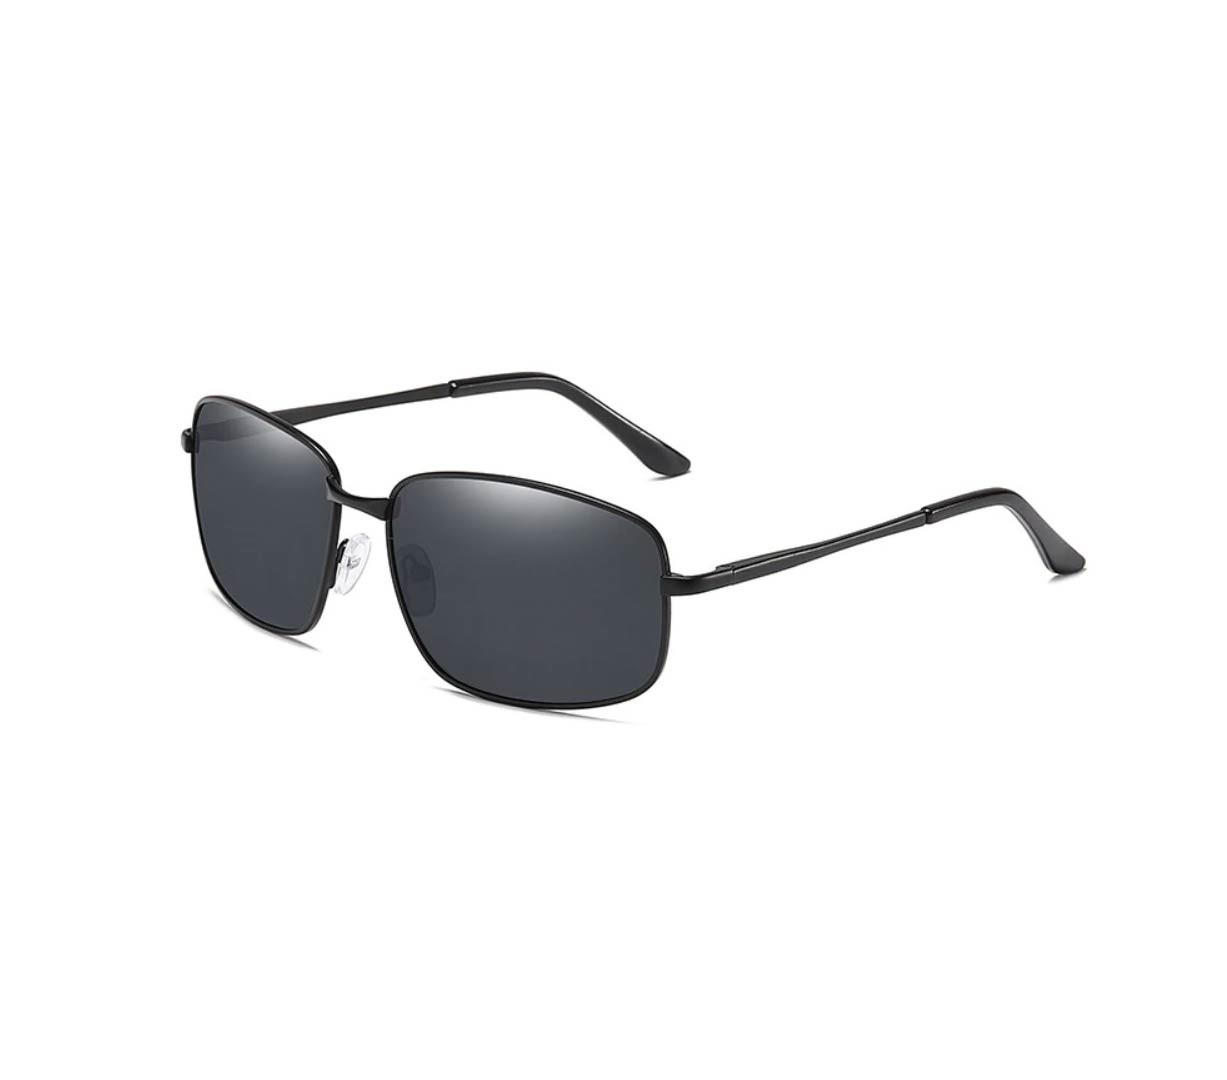 Sunglasses for Large Heads - Polarized, Driving